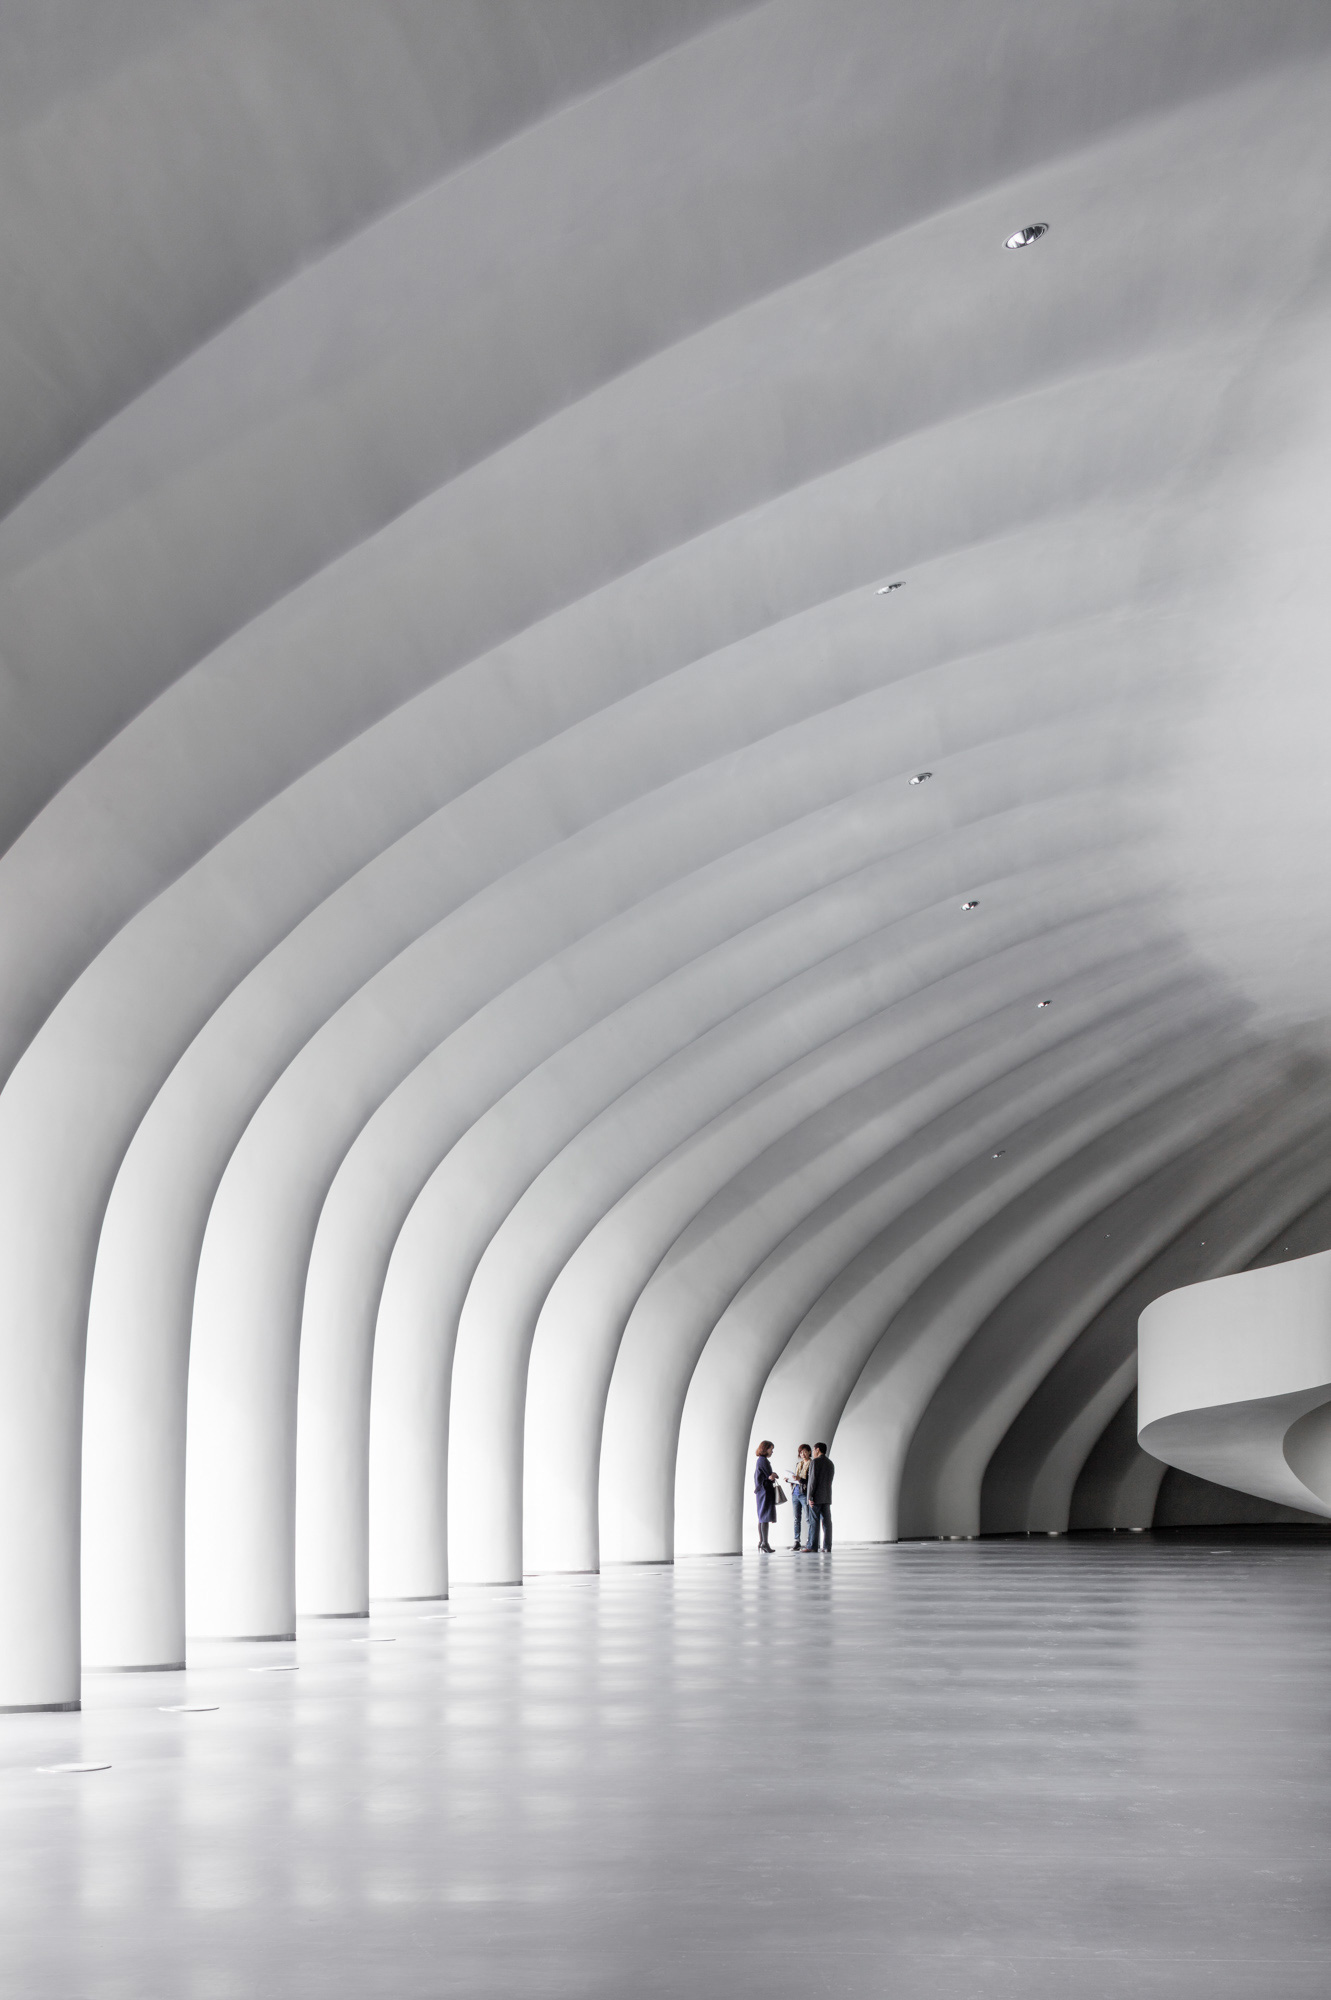 White ribbed ceiling in this impressive architecture 